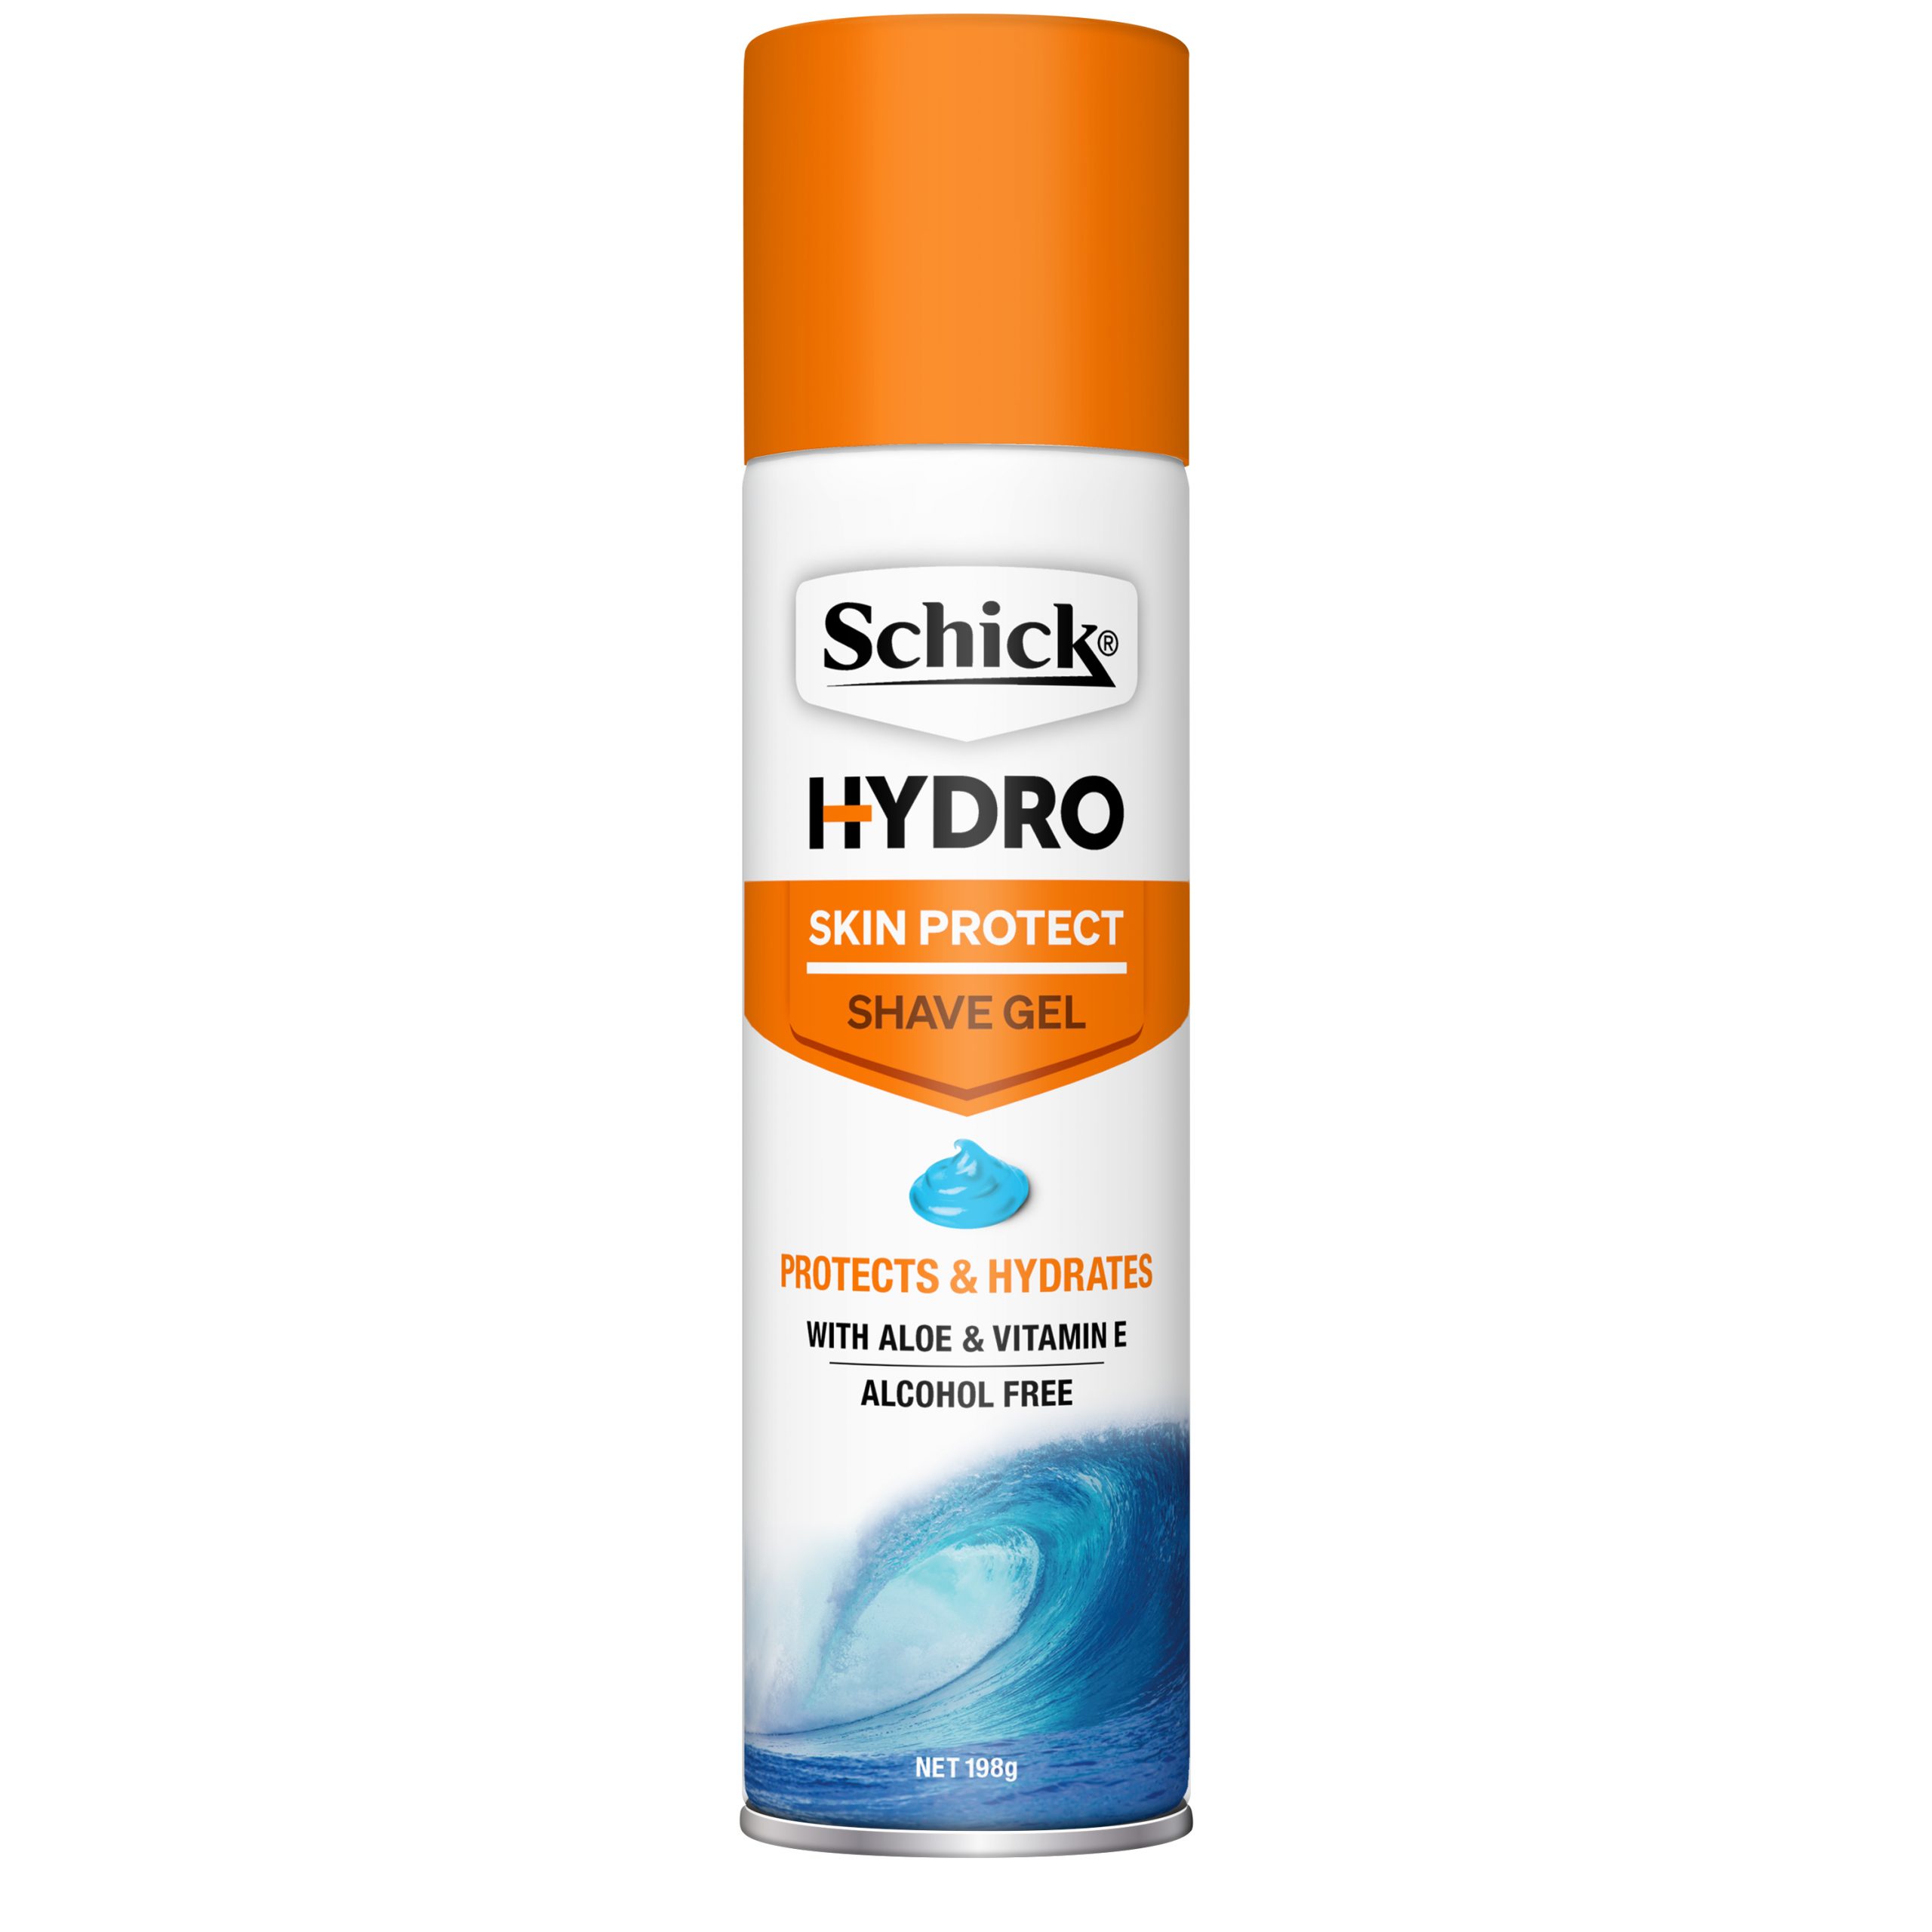 Hydro Skin Protect Shave Gel